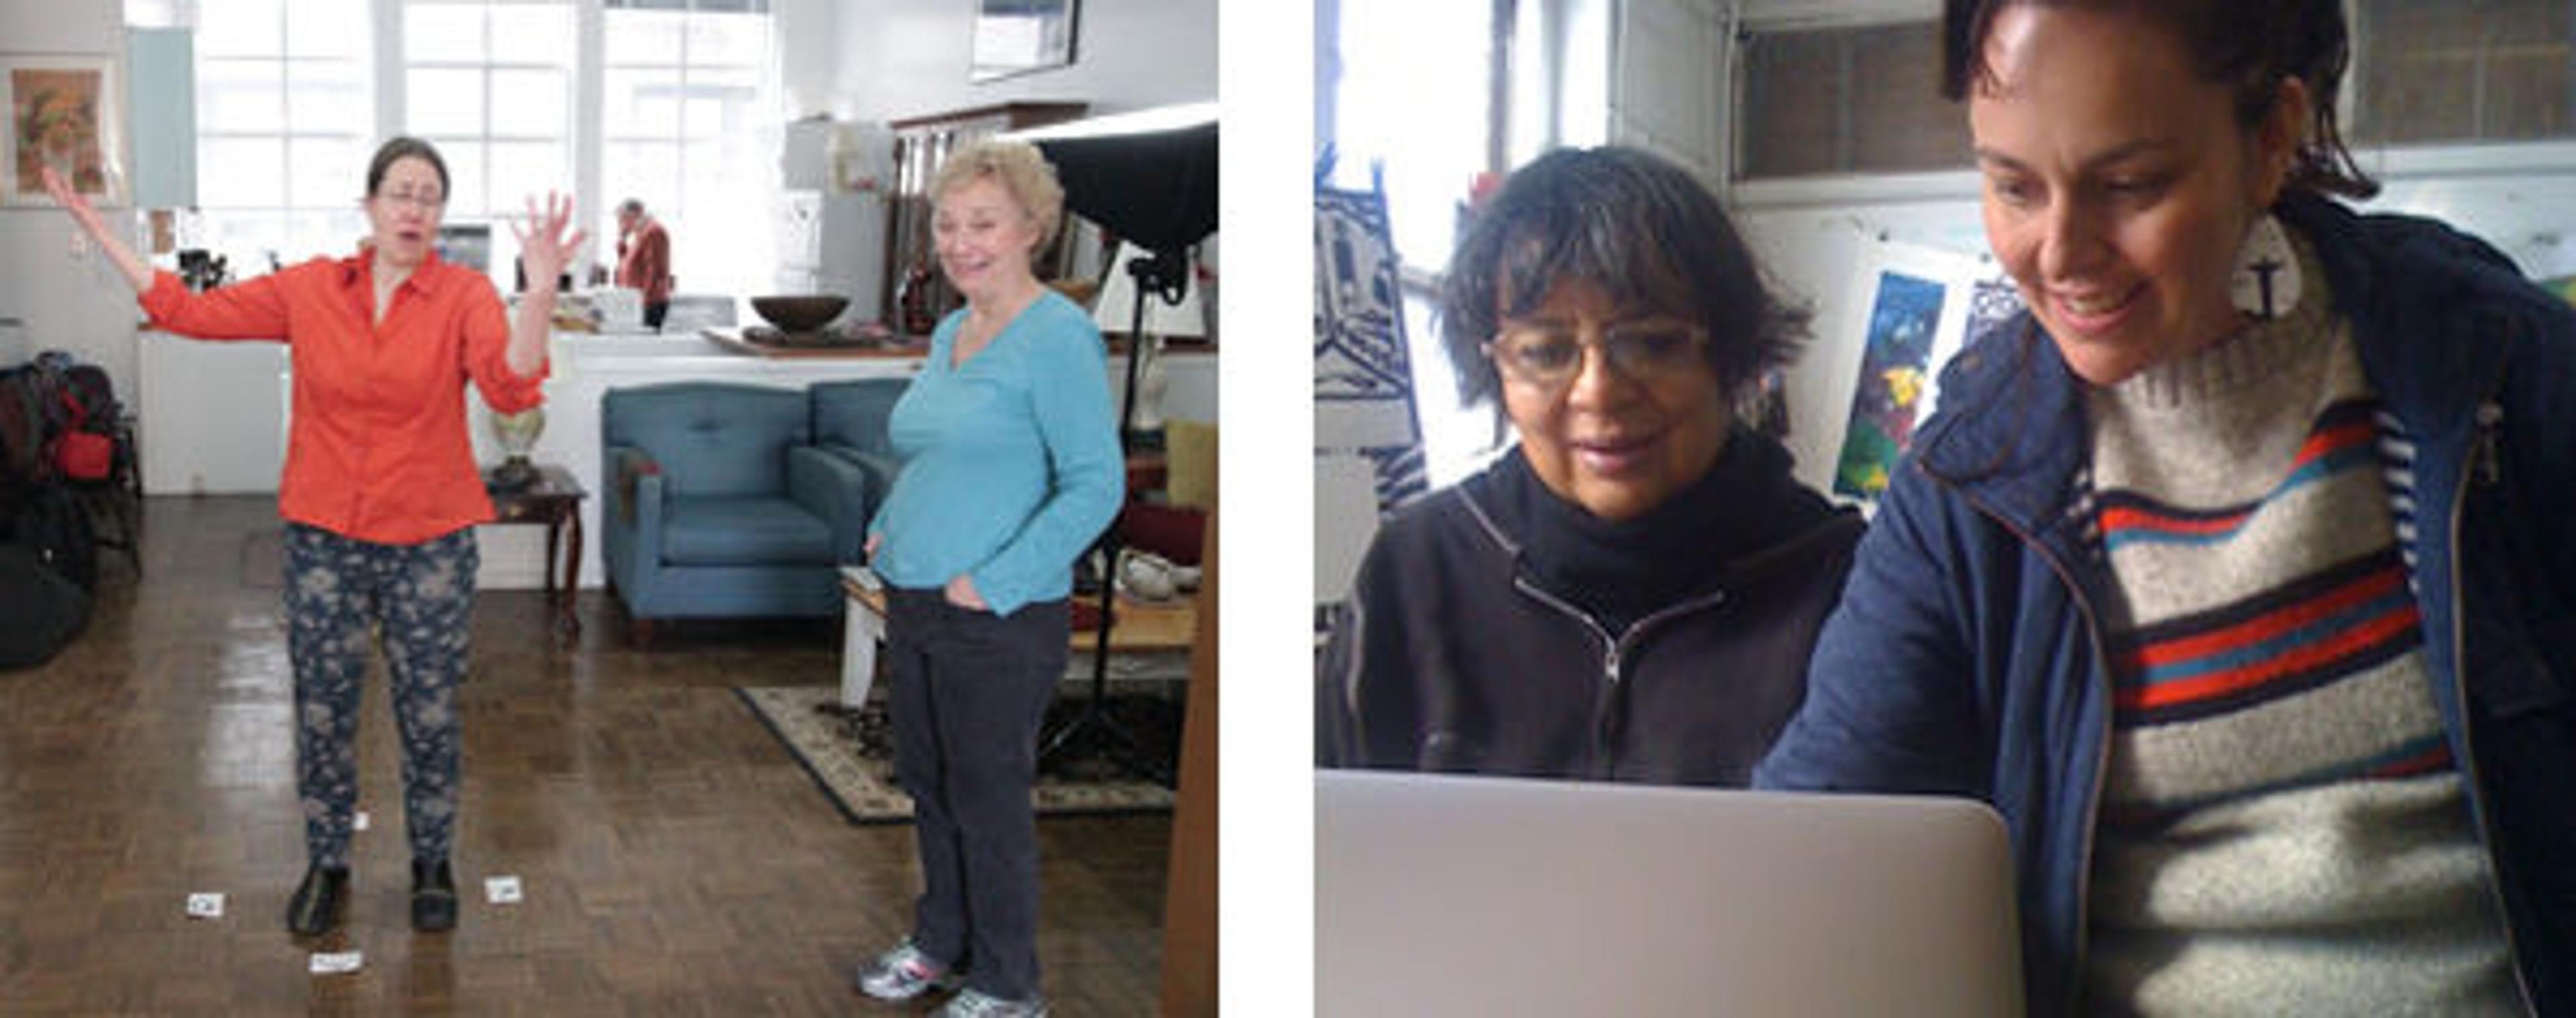 Left: Westbeth residents Vanessa Gilbert (left), Paul Binnerts (background), and Nancy Gabor (right). Right Westbeth resident Christina Maile (left) and PIMA student Justine Williams together in the studio